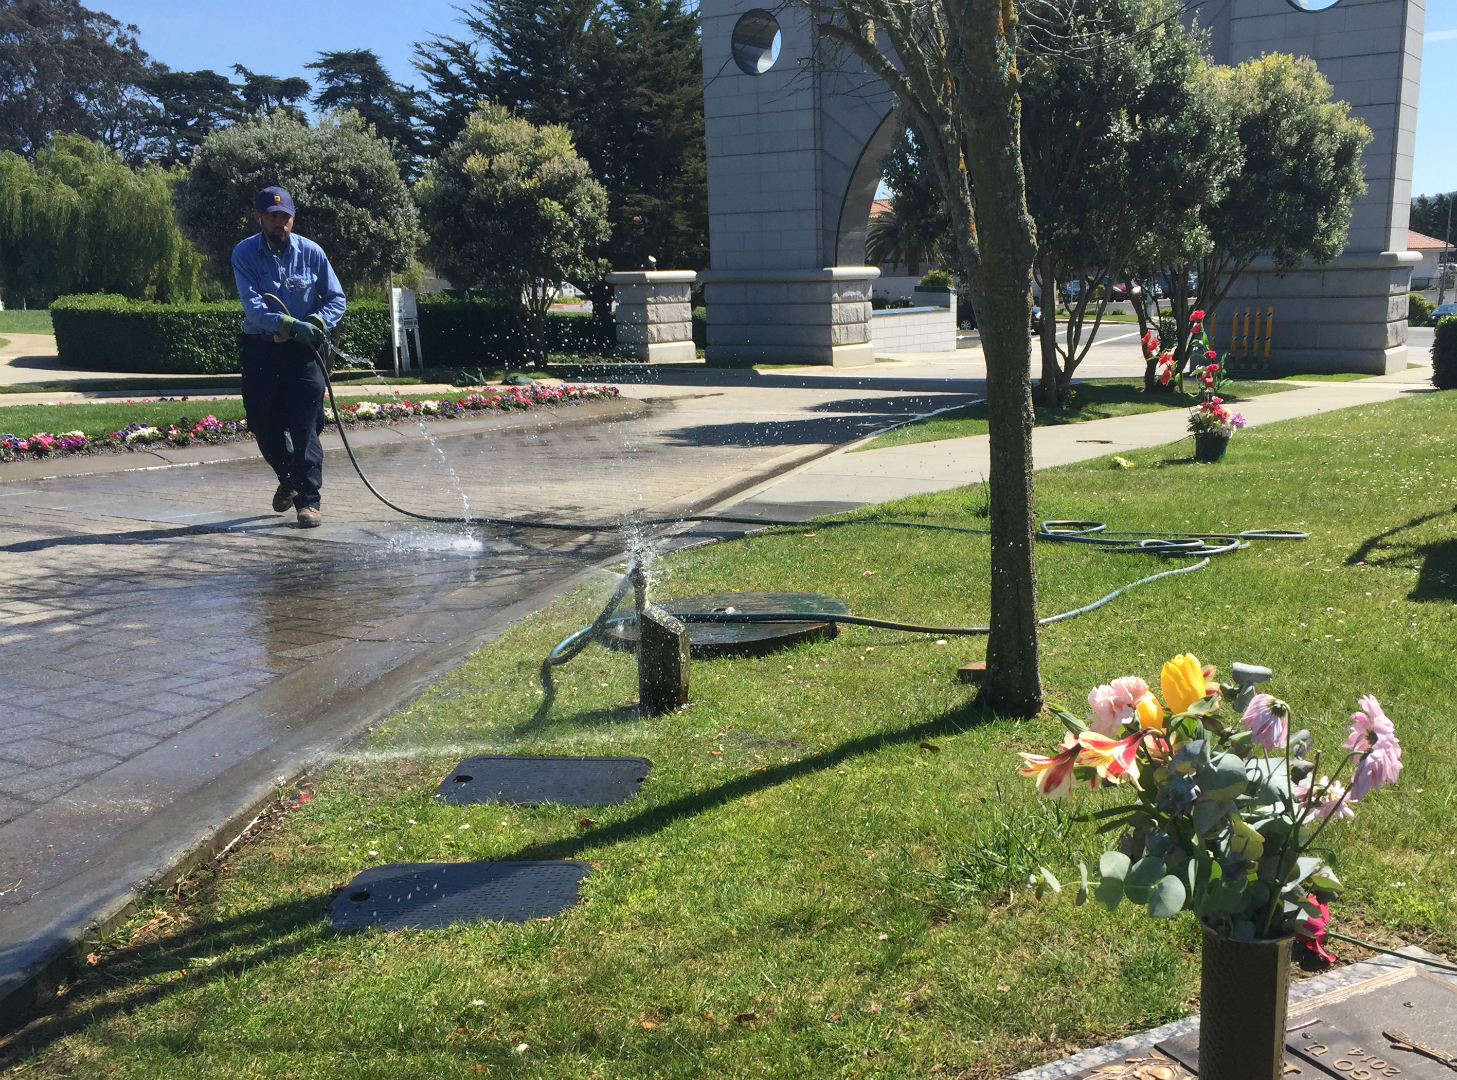 A worker sprays down part of Cypress Lawn Memorial Park in Colma. Officials hope to cut back water-use there, but not so much the grass goes brown. (Daniel Potter/KQED)